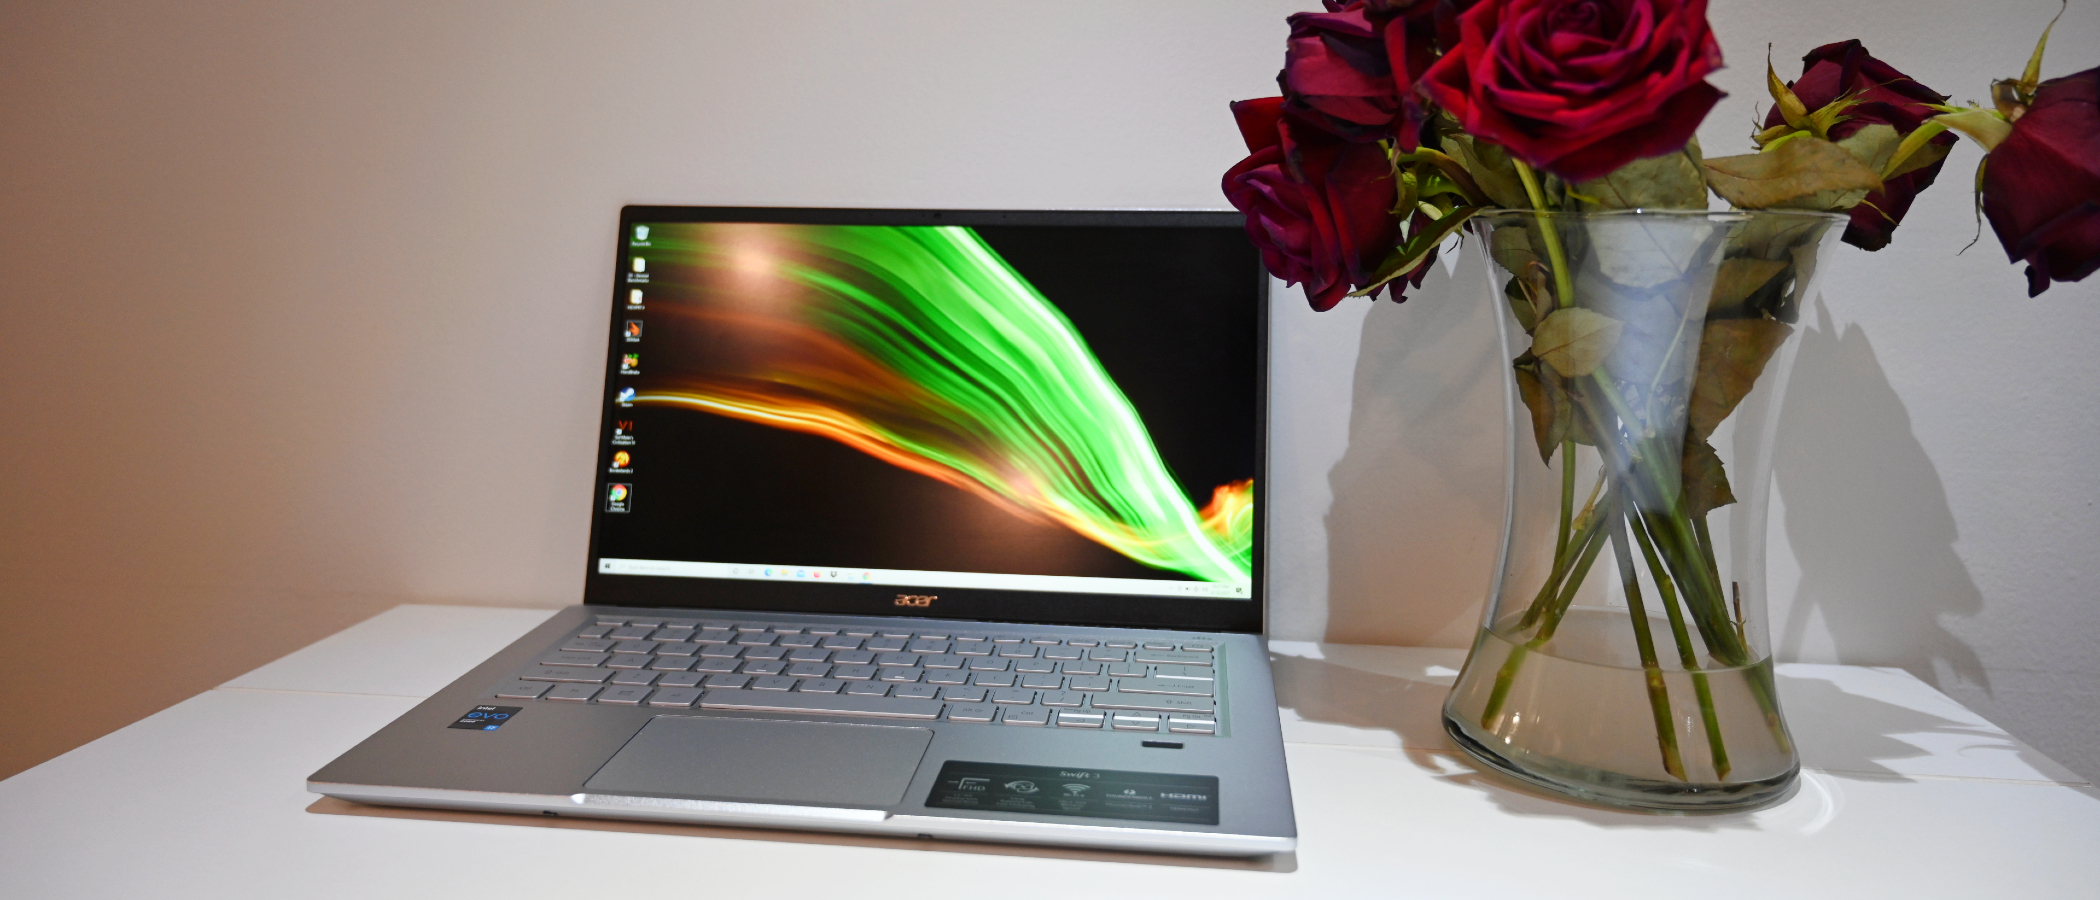 Review: Acer Swift 3 Laptop